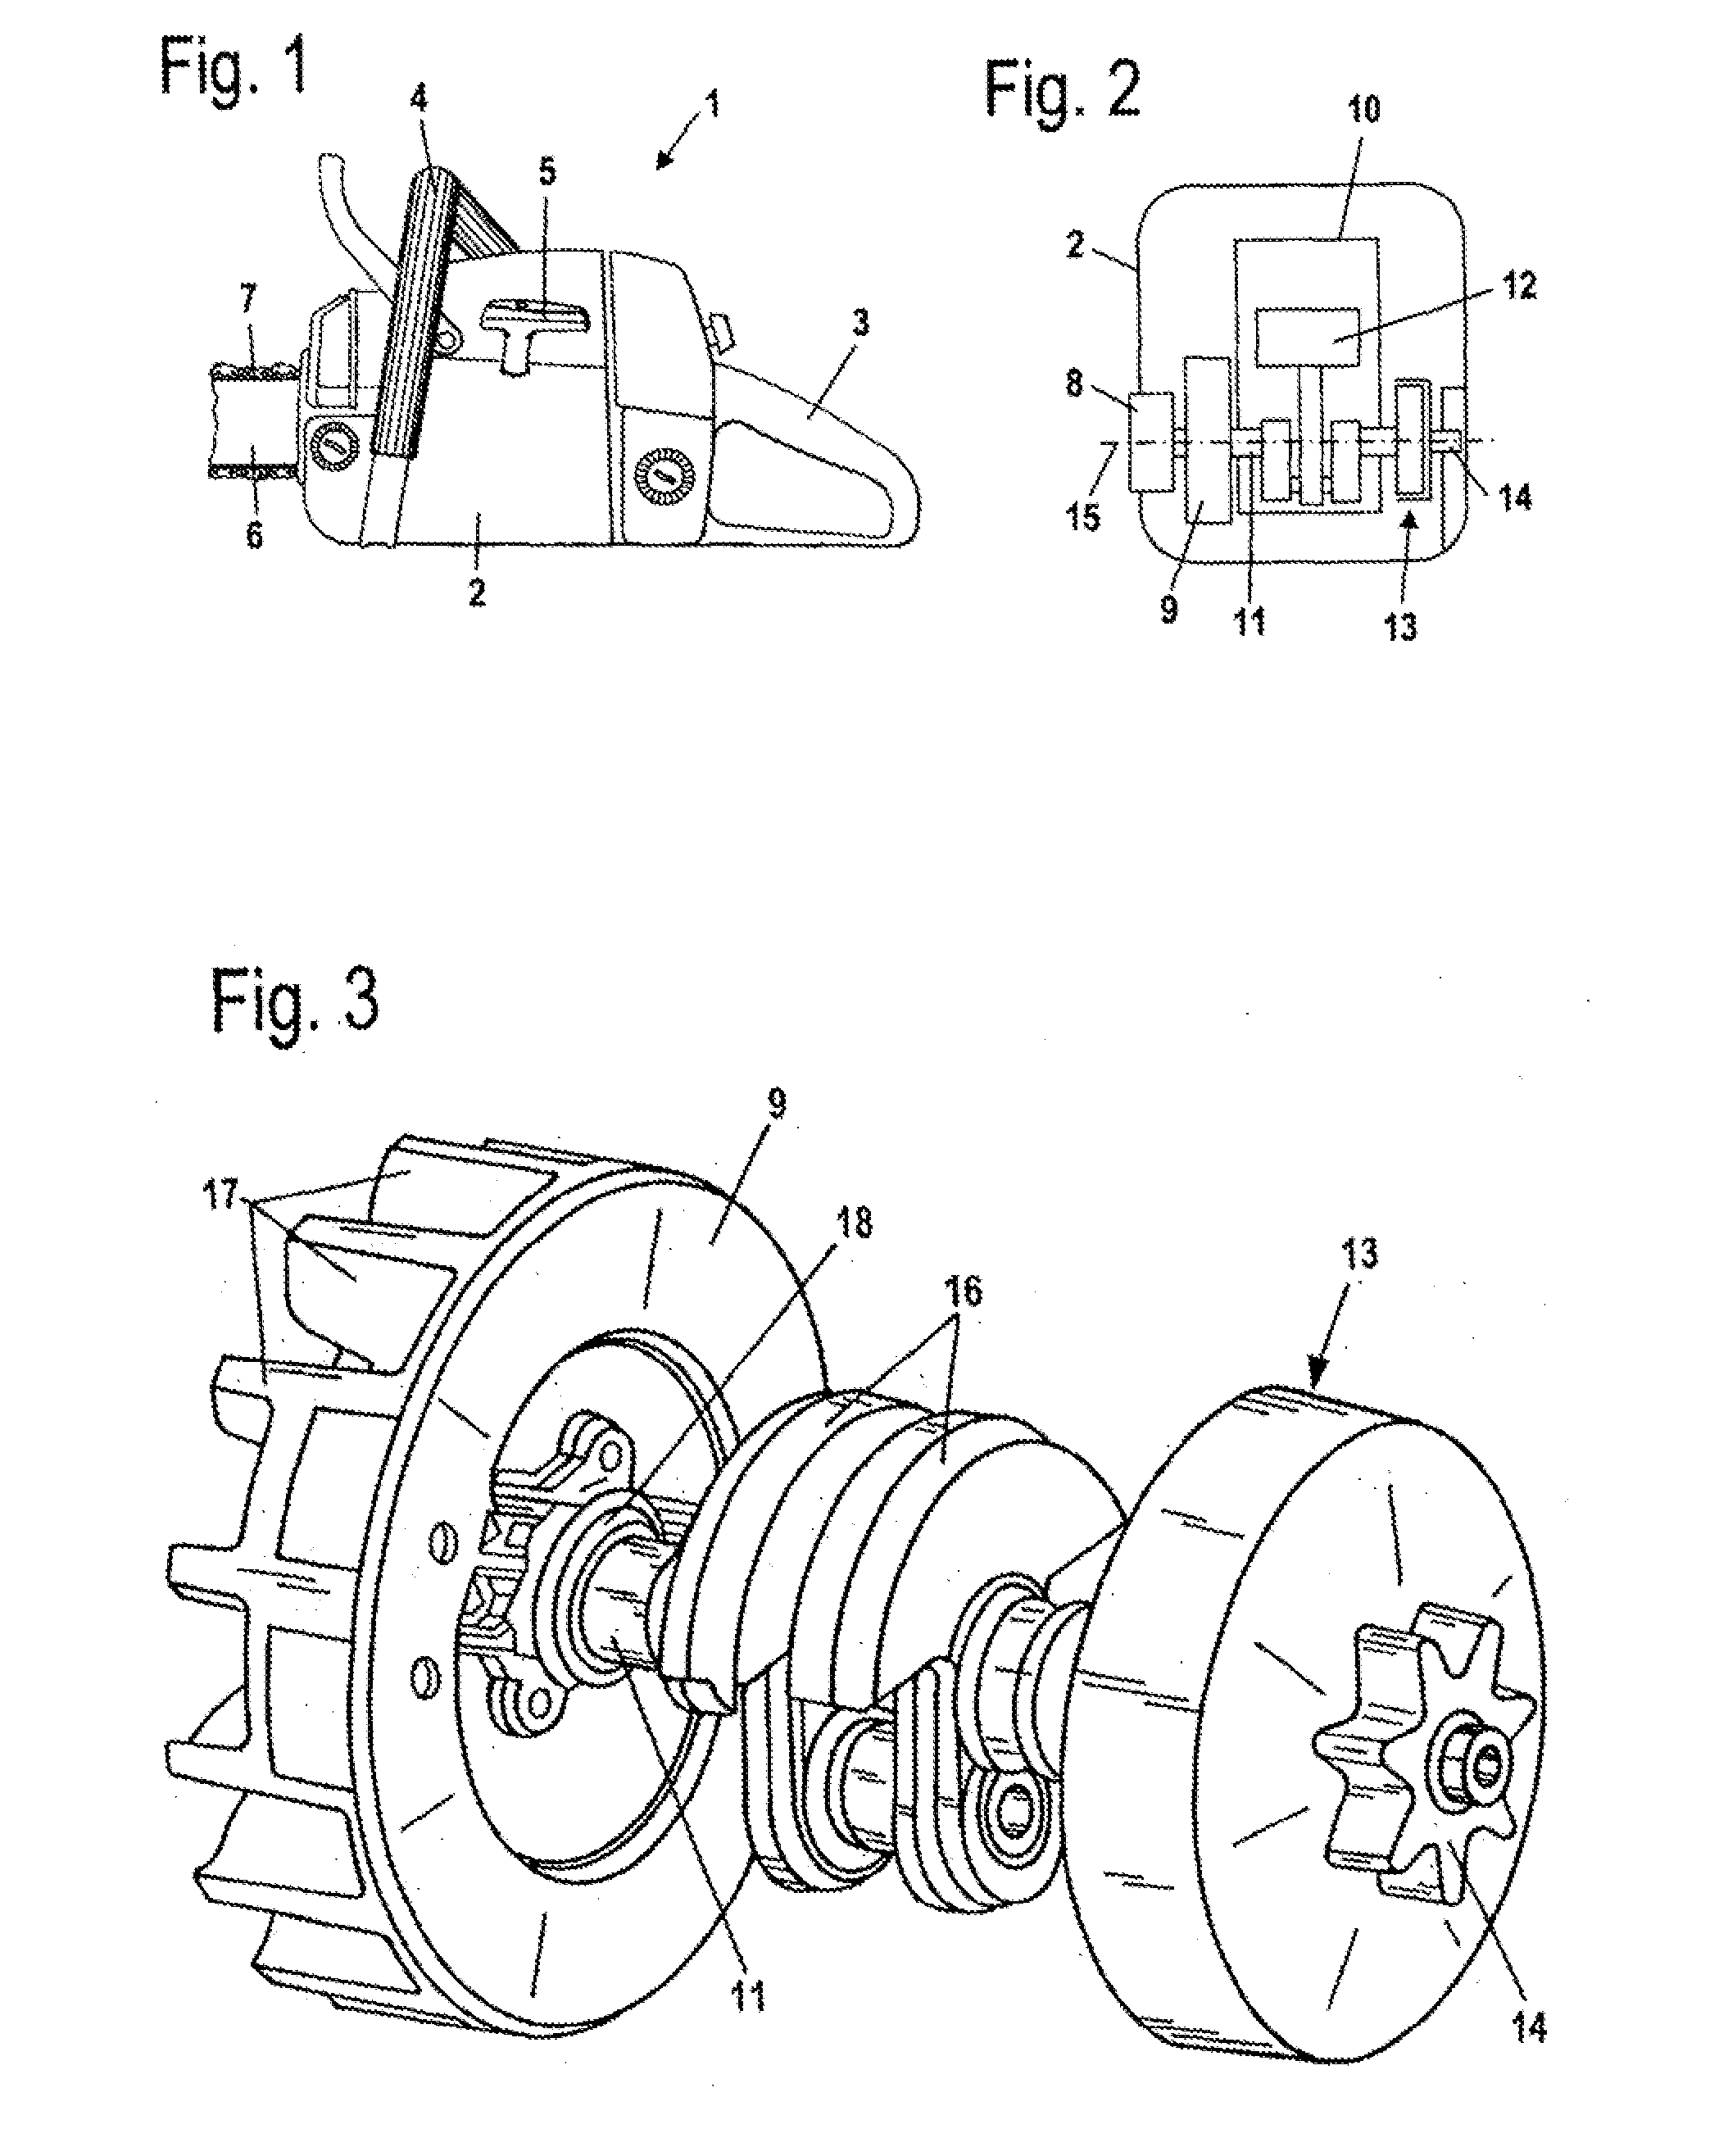 Shaft/Hub Connection and Manually Guided Implement